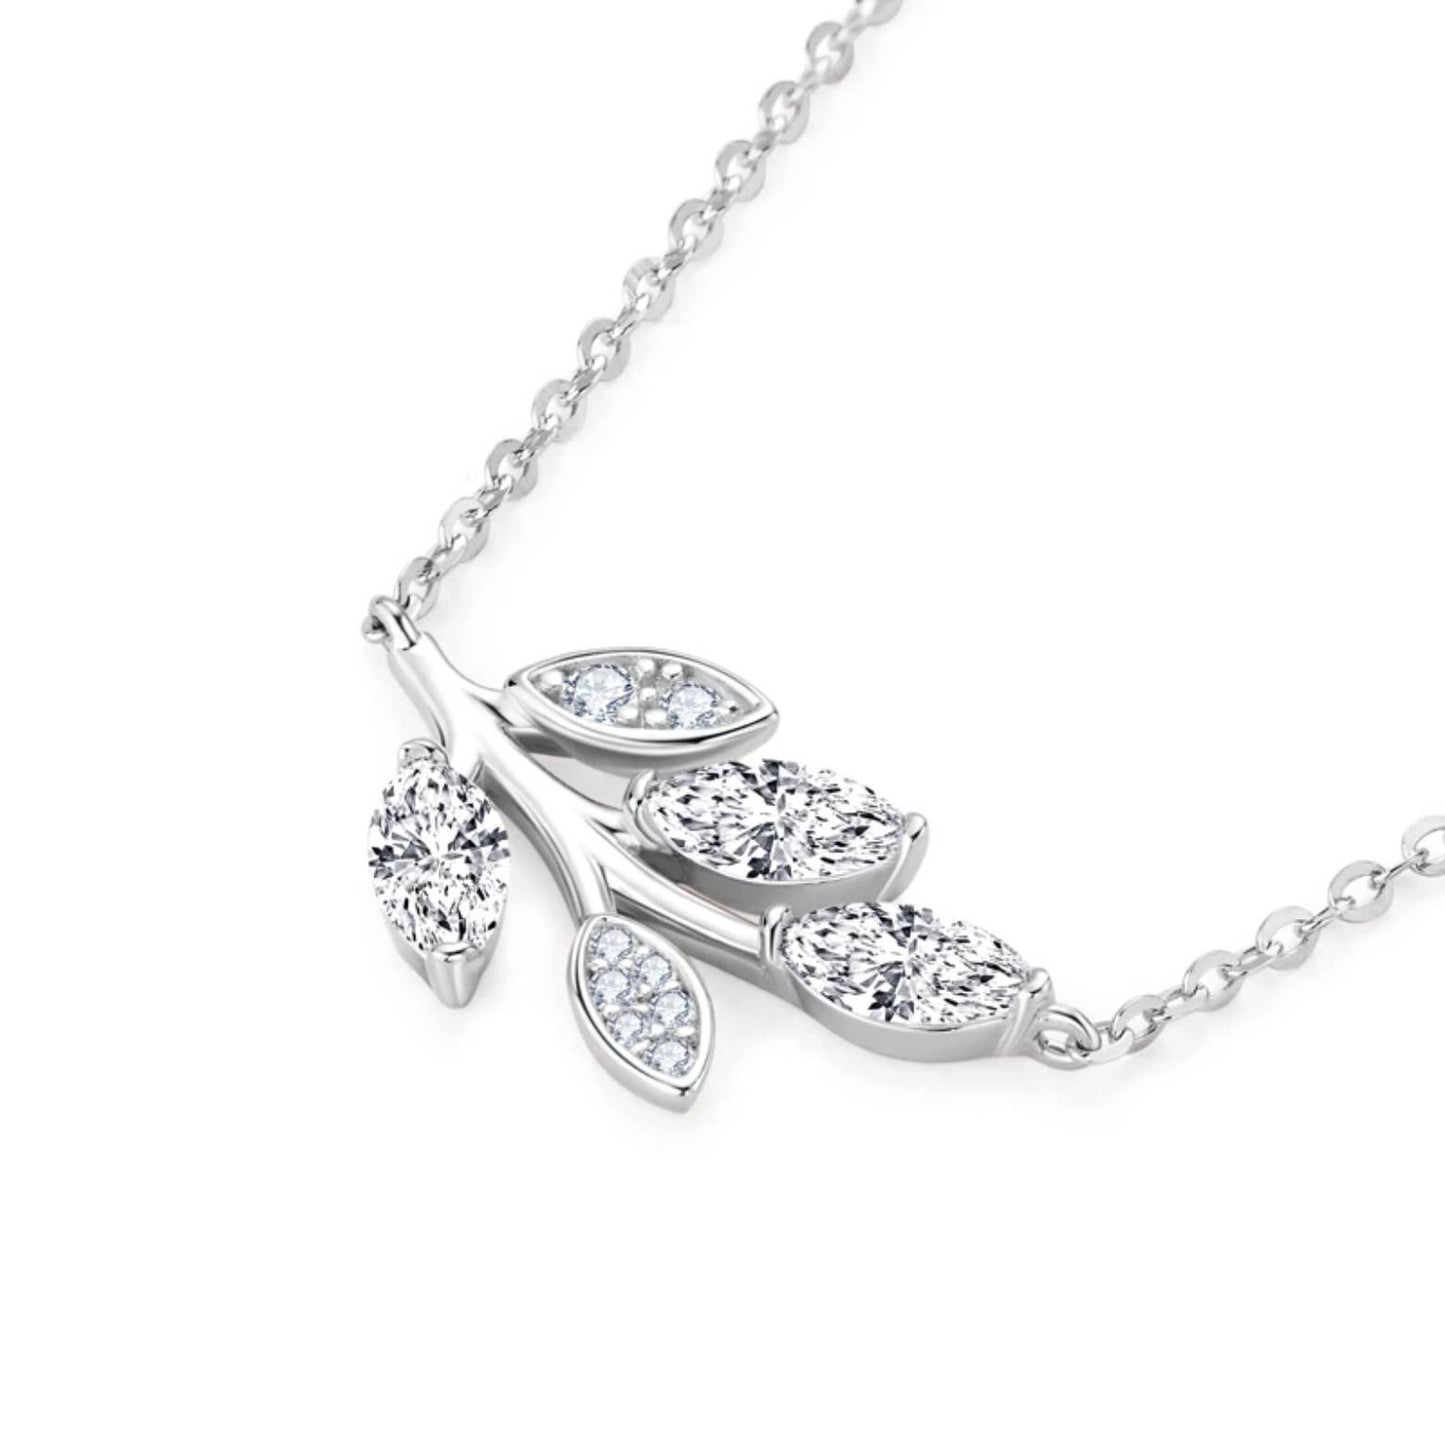 Moissanite Leaf Pendant Necklace - Marquise Cut 925 Sterling Silver